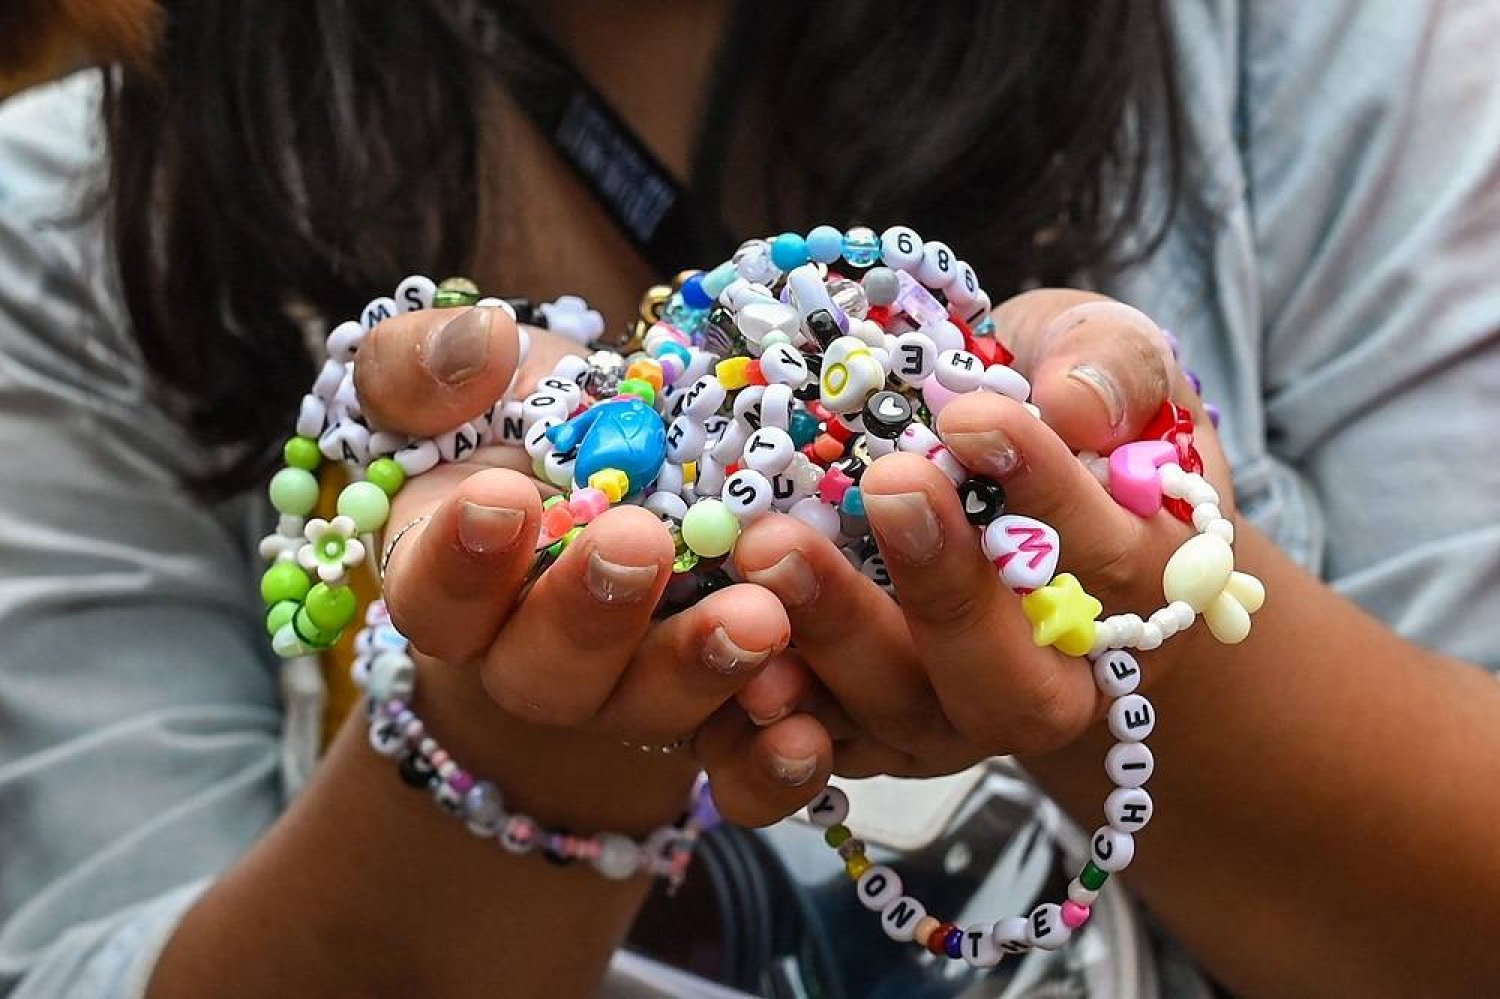 A fan of US singer Taylor Swift, also known as a Swiftie, holds friendship bracelets as she arrives for the first of the pop star's six sold-out Eras Tour concerts at the National Stadium in Singapore on March 2, 2024. (AFP)